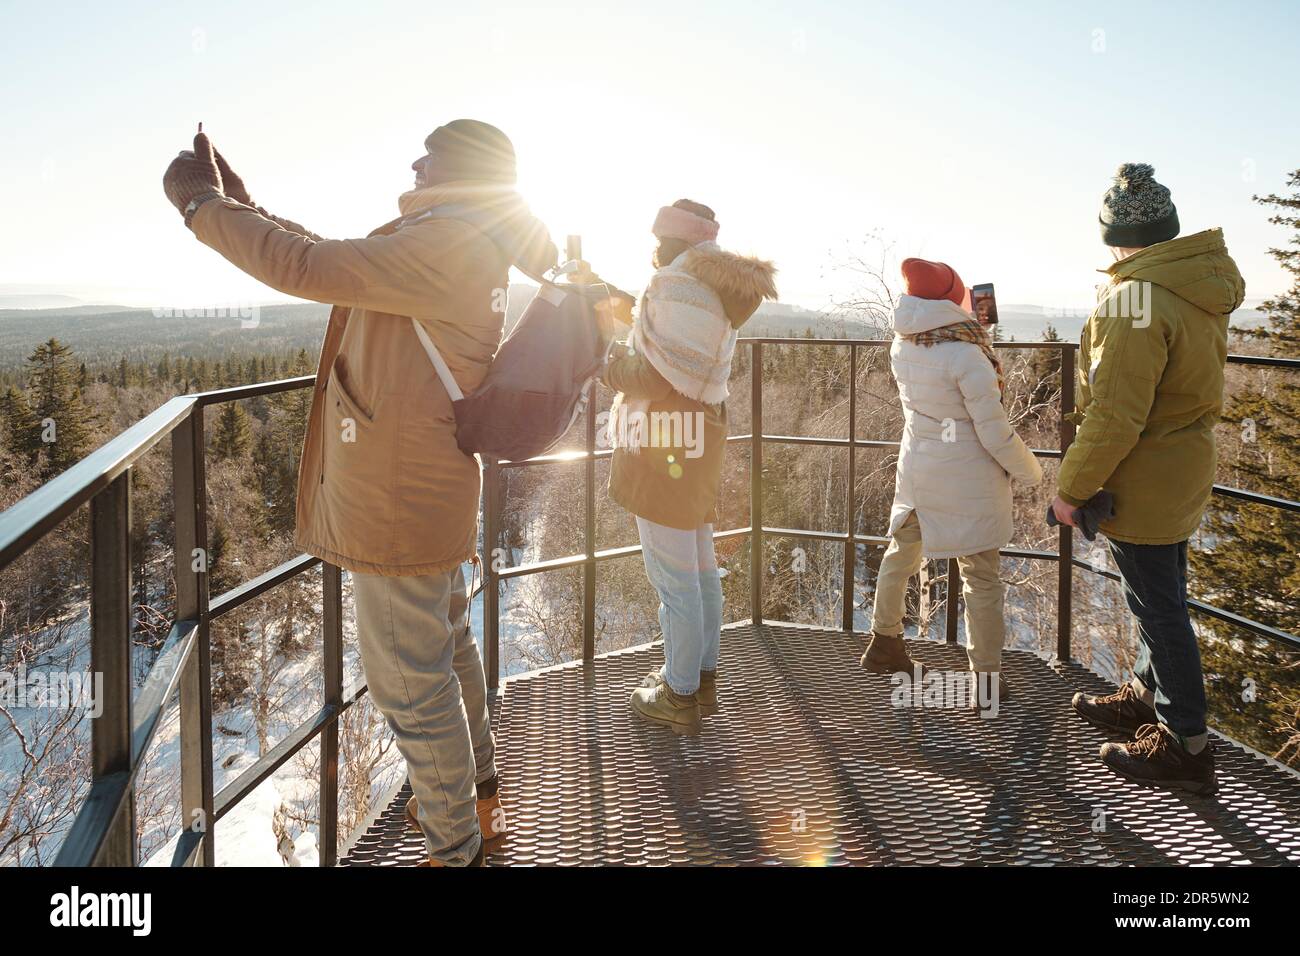 Group of young friends in winterwear taking photo of majestic scenery of mountains and forest covered with snow against sun shining on blue sky Stock Photo